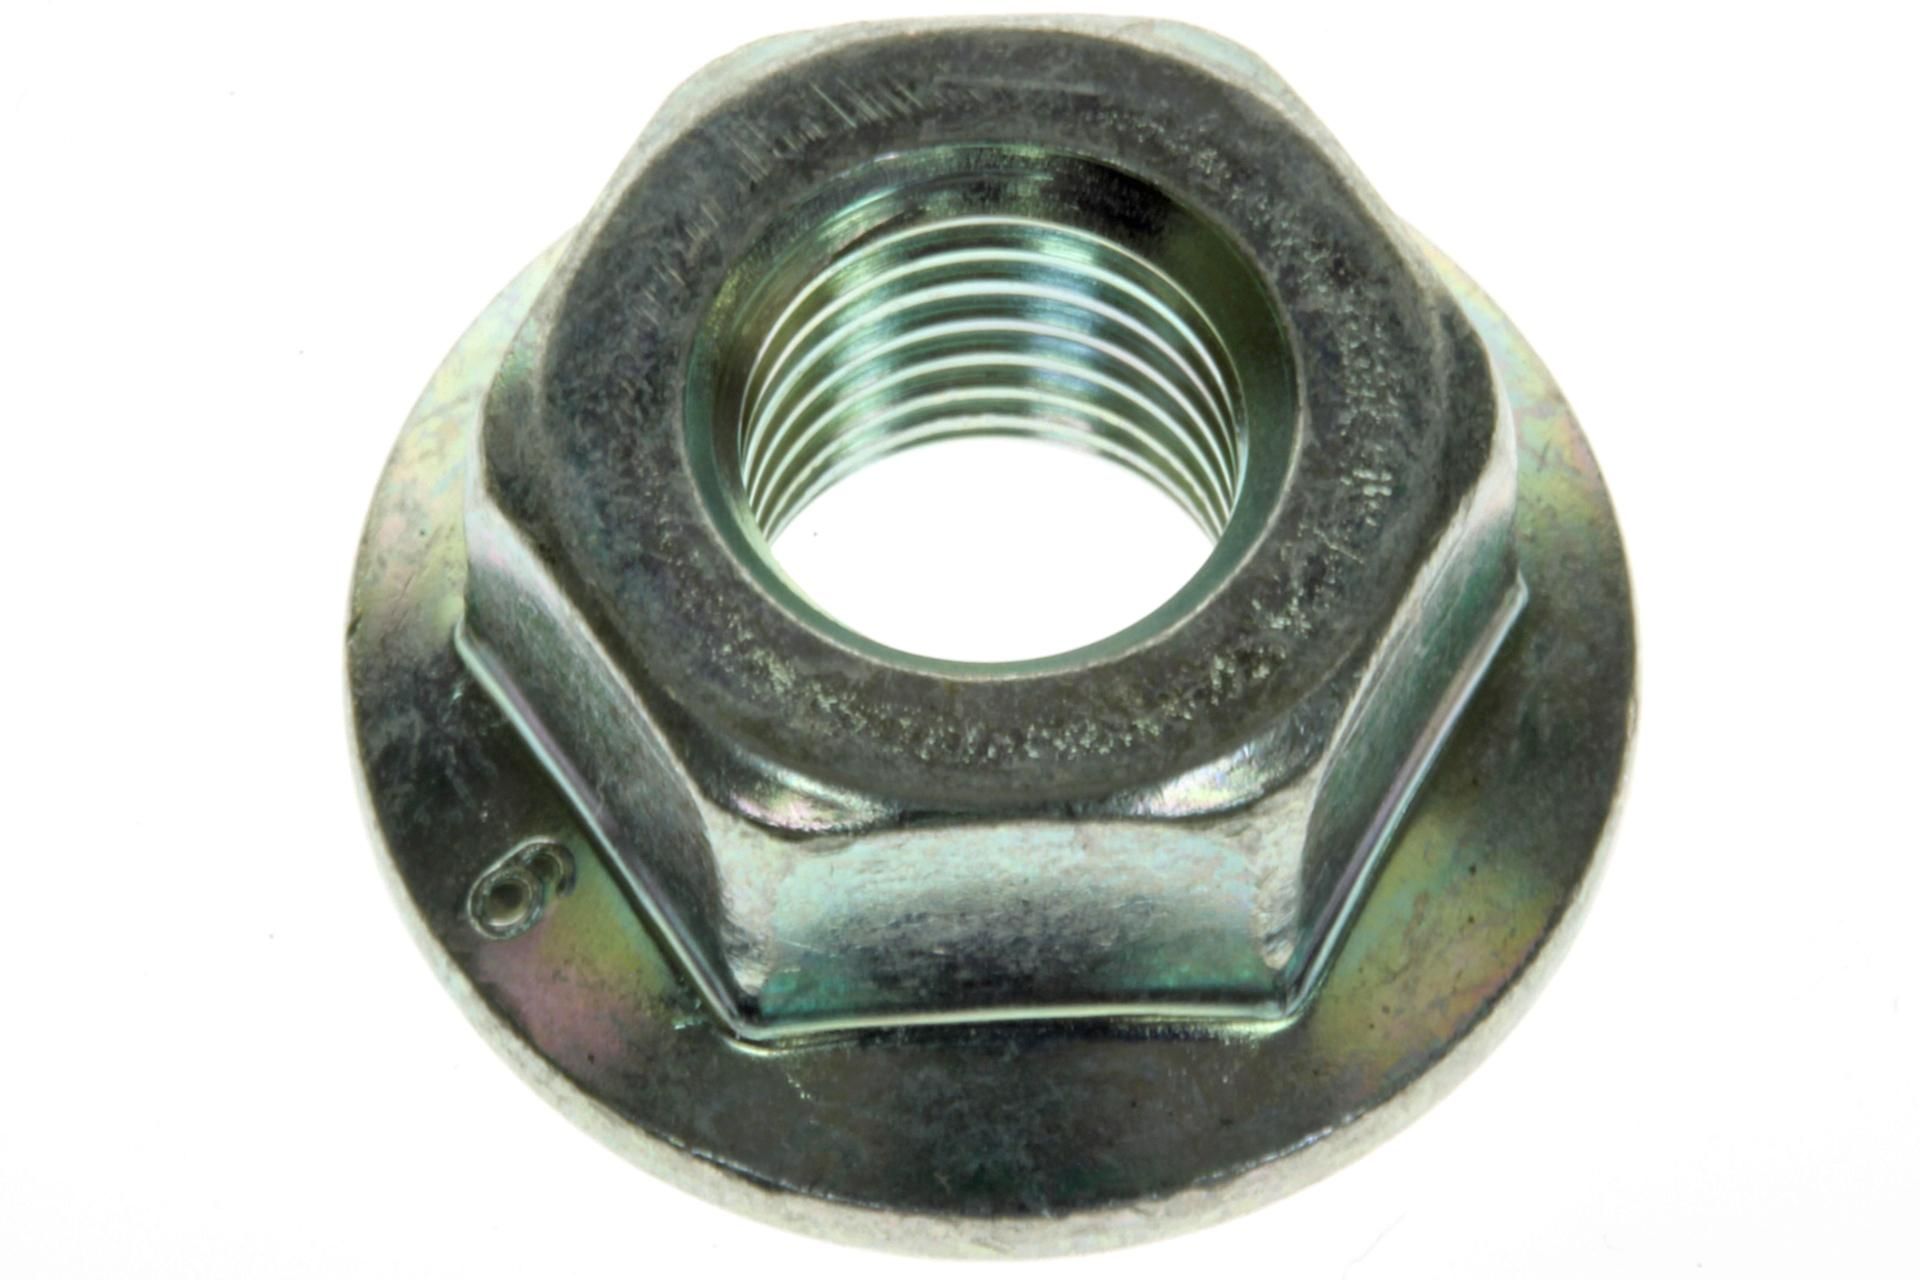 92210-0215 NUT,FLANGED,10MM